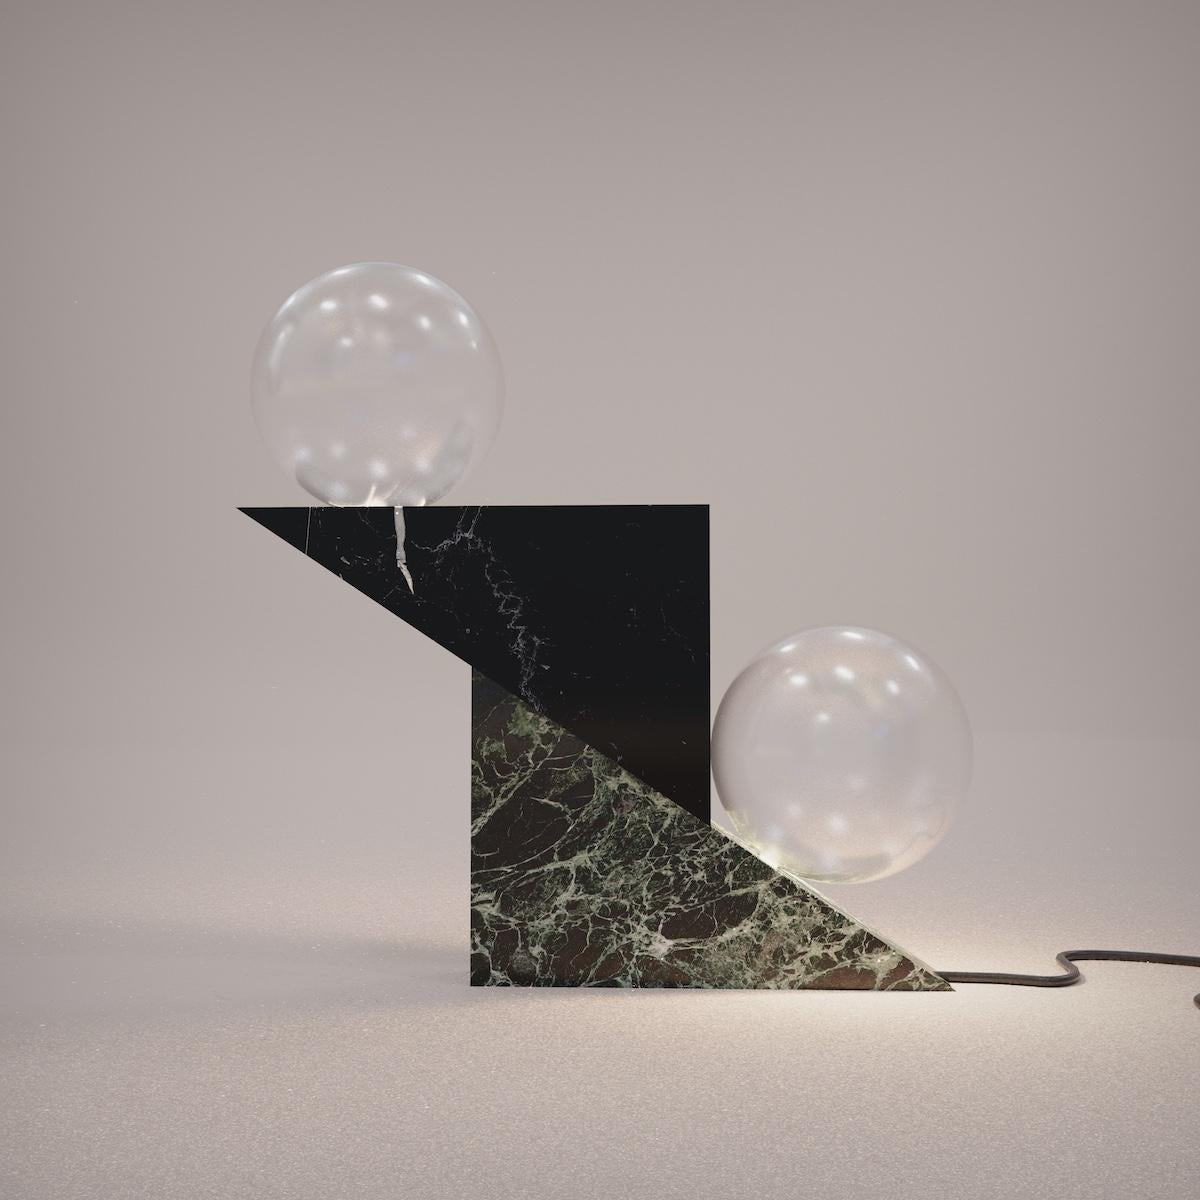 About
Contemporary Italian Marble Clitemnestra Table Lamp for October Gallery

Clitemnestra Table Lamp
Design by CARCINO Design exclusively for October Gallery
Table Lamp
Materials: Black Marquina Marble, Green Alpi Marble, Opal Glass